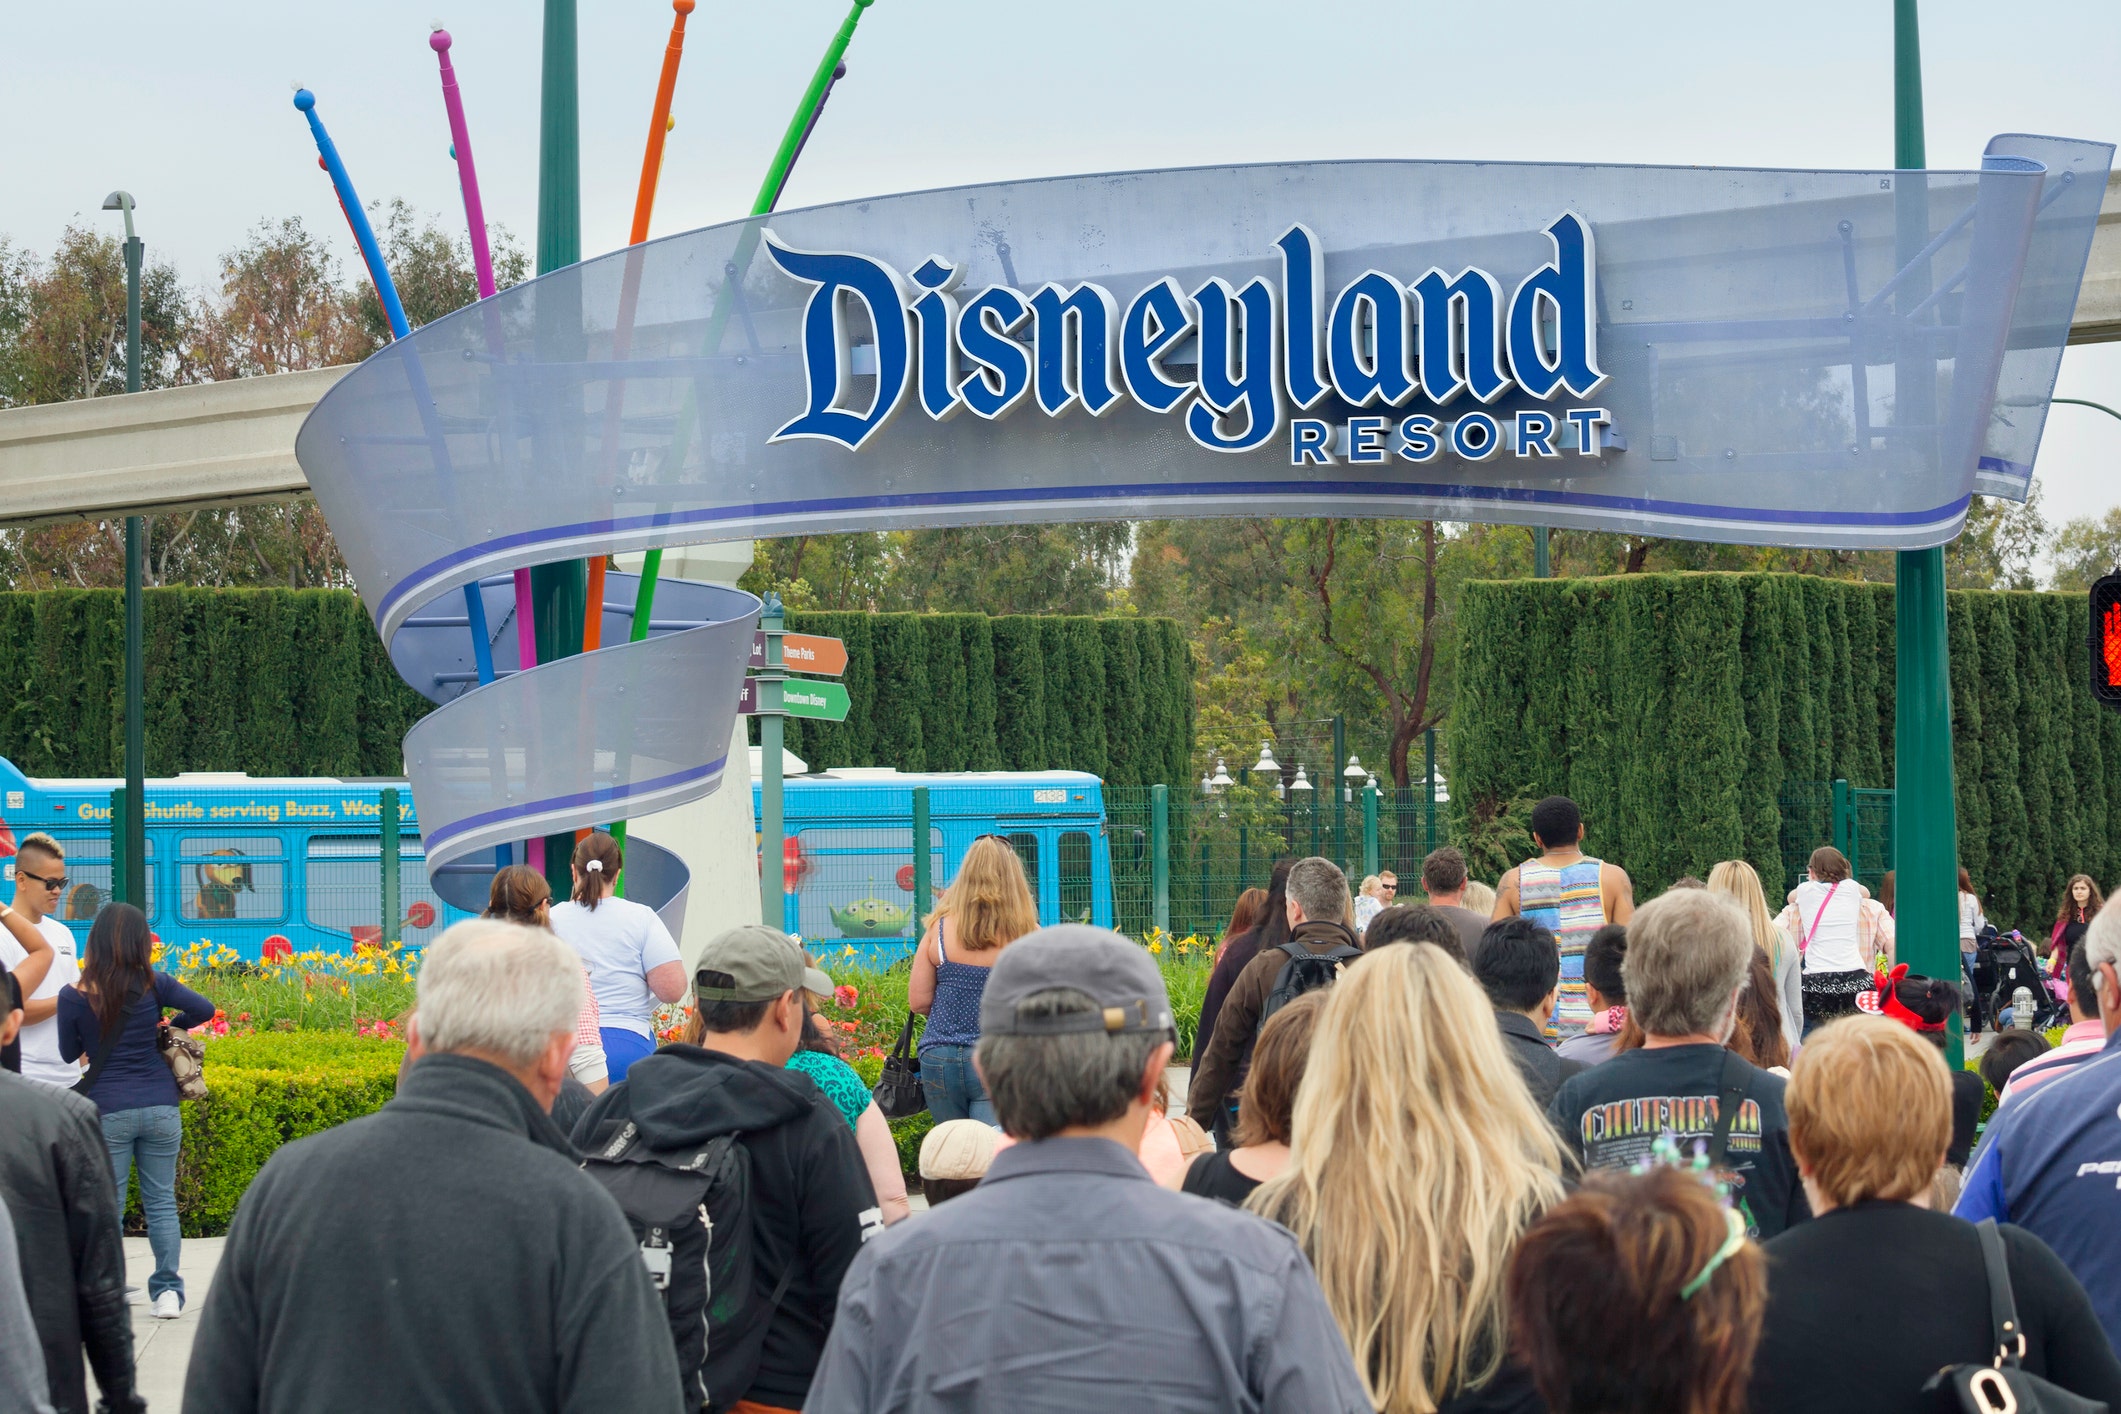 Disneyland will reopen on April 30 at limited capacity, require guests to make reservations